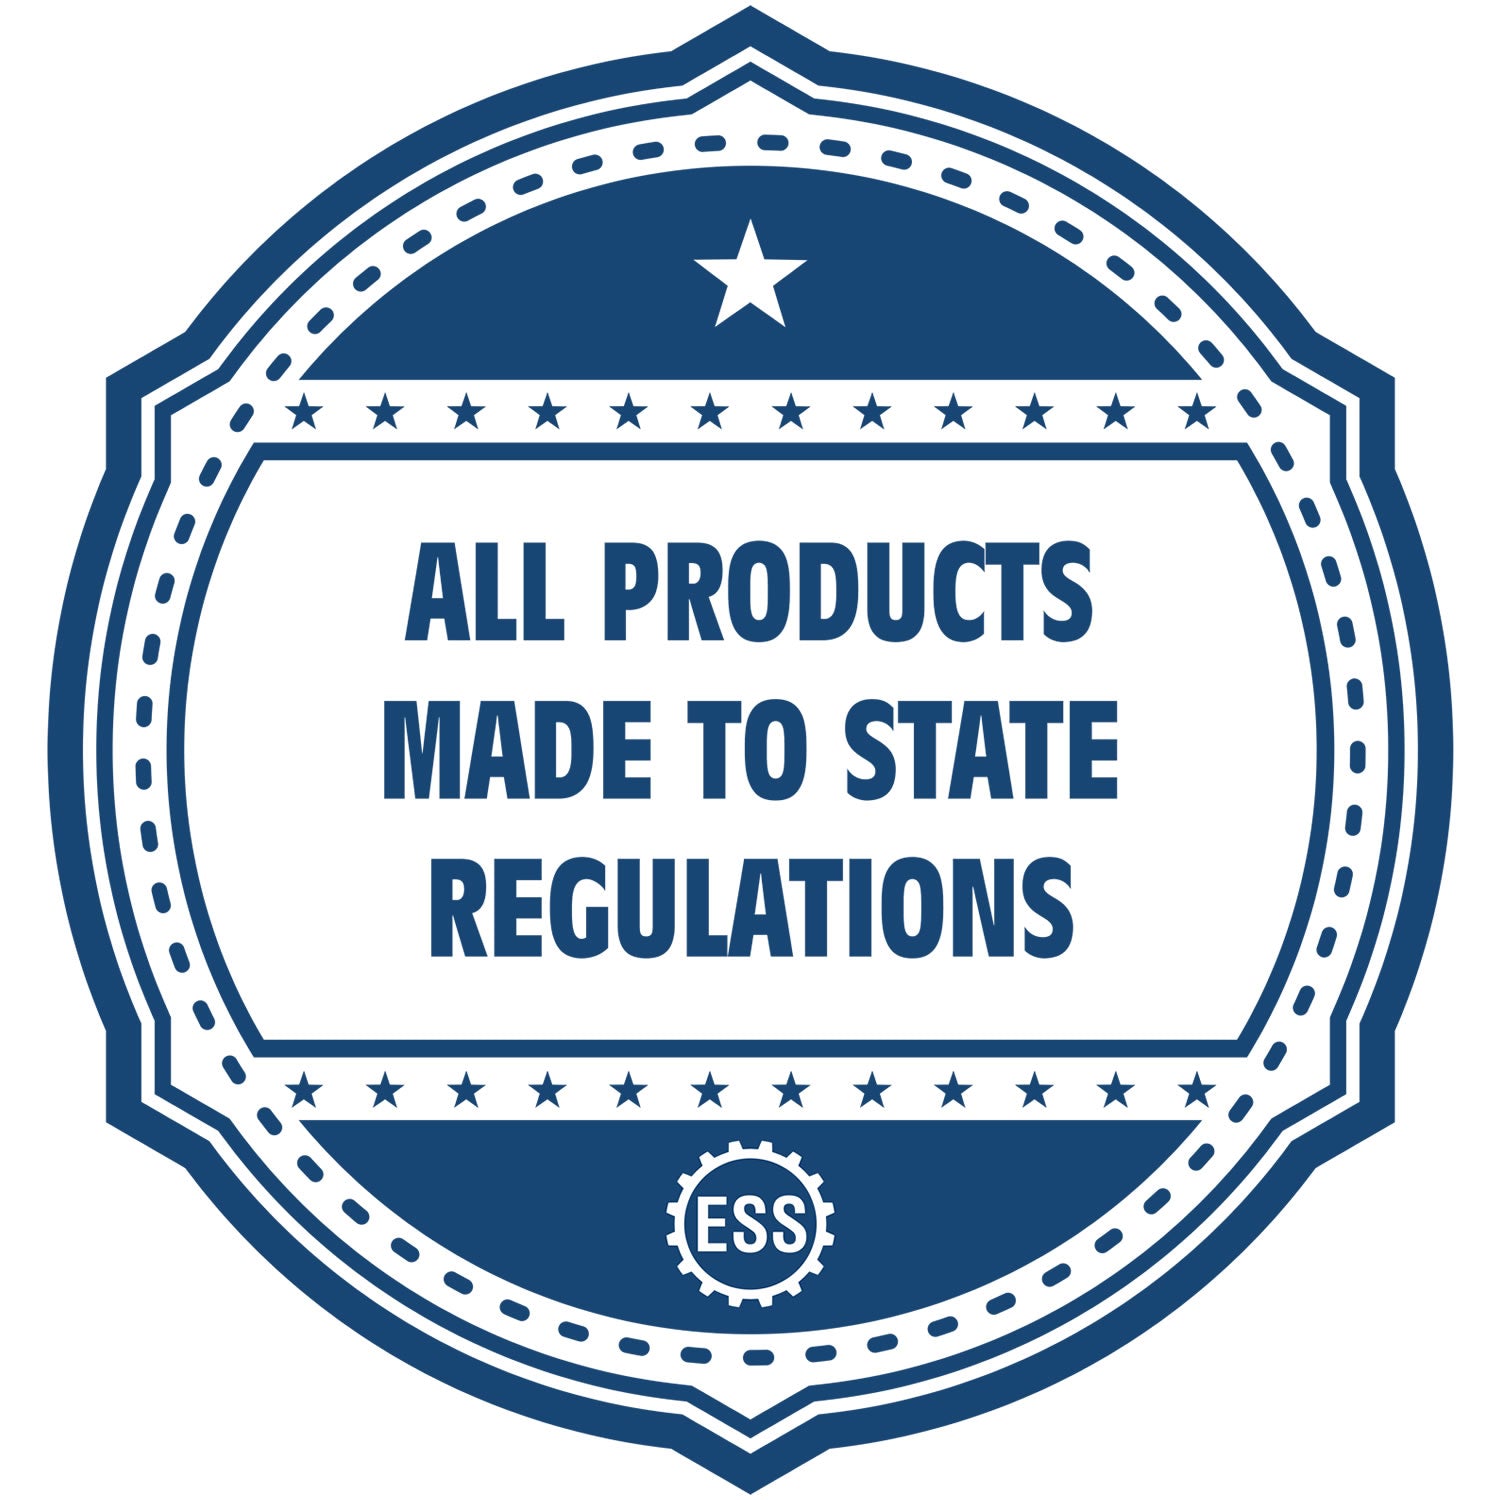 An icon or badge element for the State of North Carolina Architectural Seal Embosser showing that this product is made in compliance with state regulations.